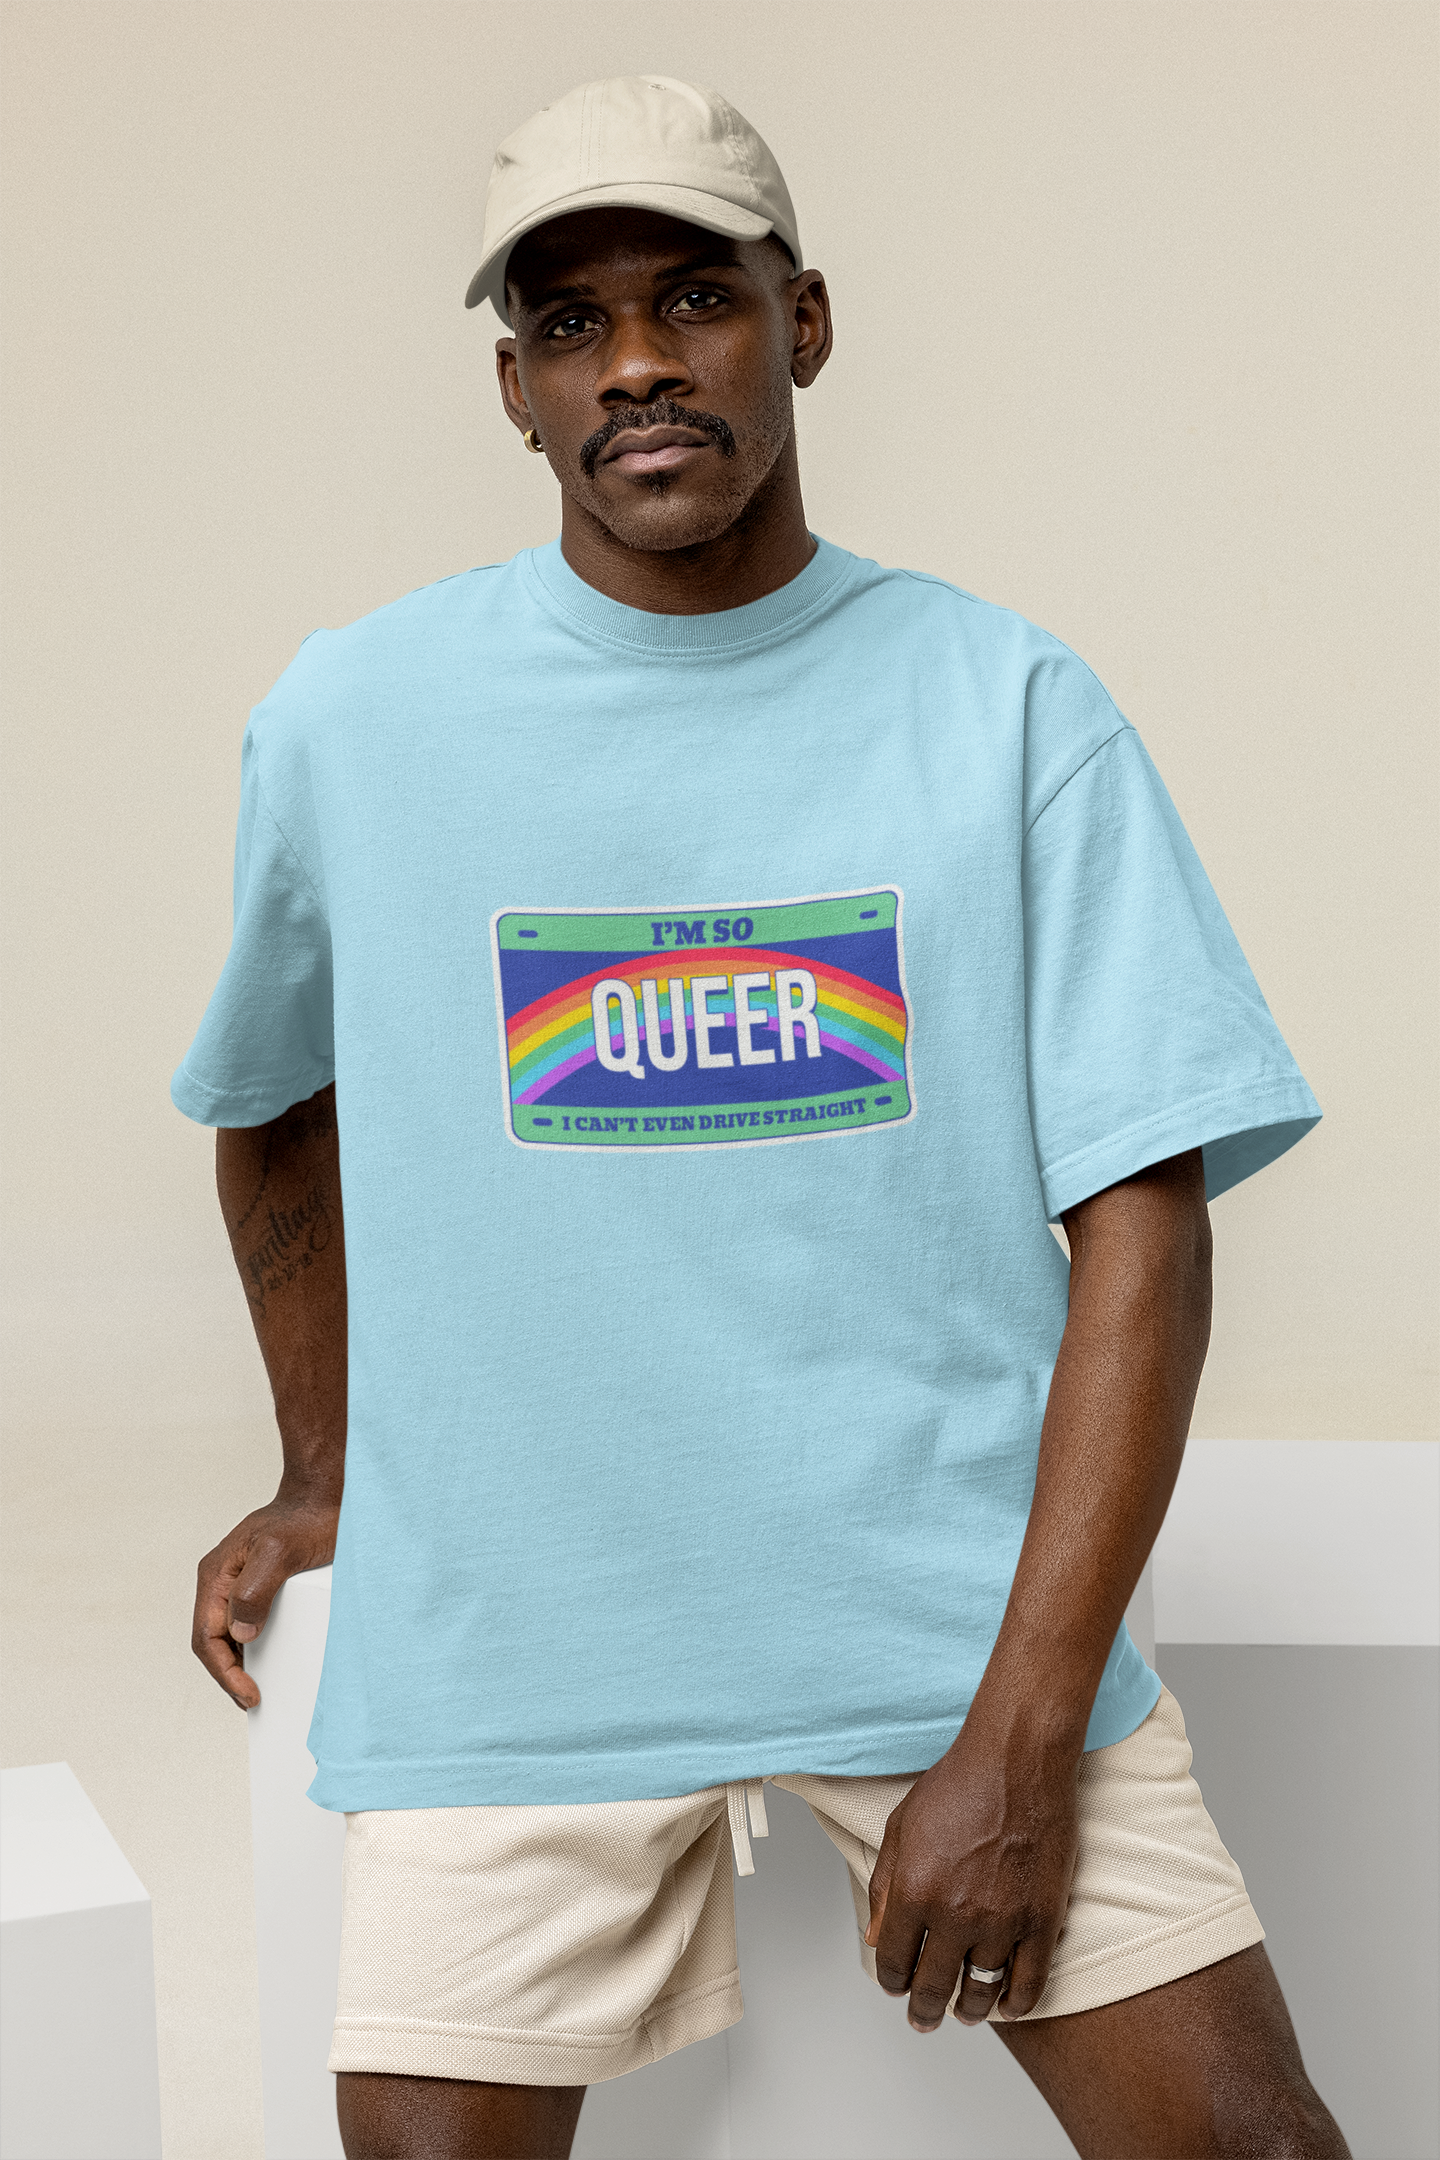 OVERSIZED TSHIRTS BABY BLUE: QUEER